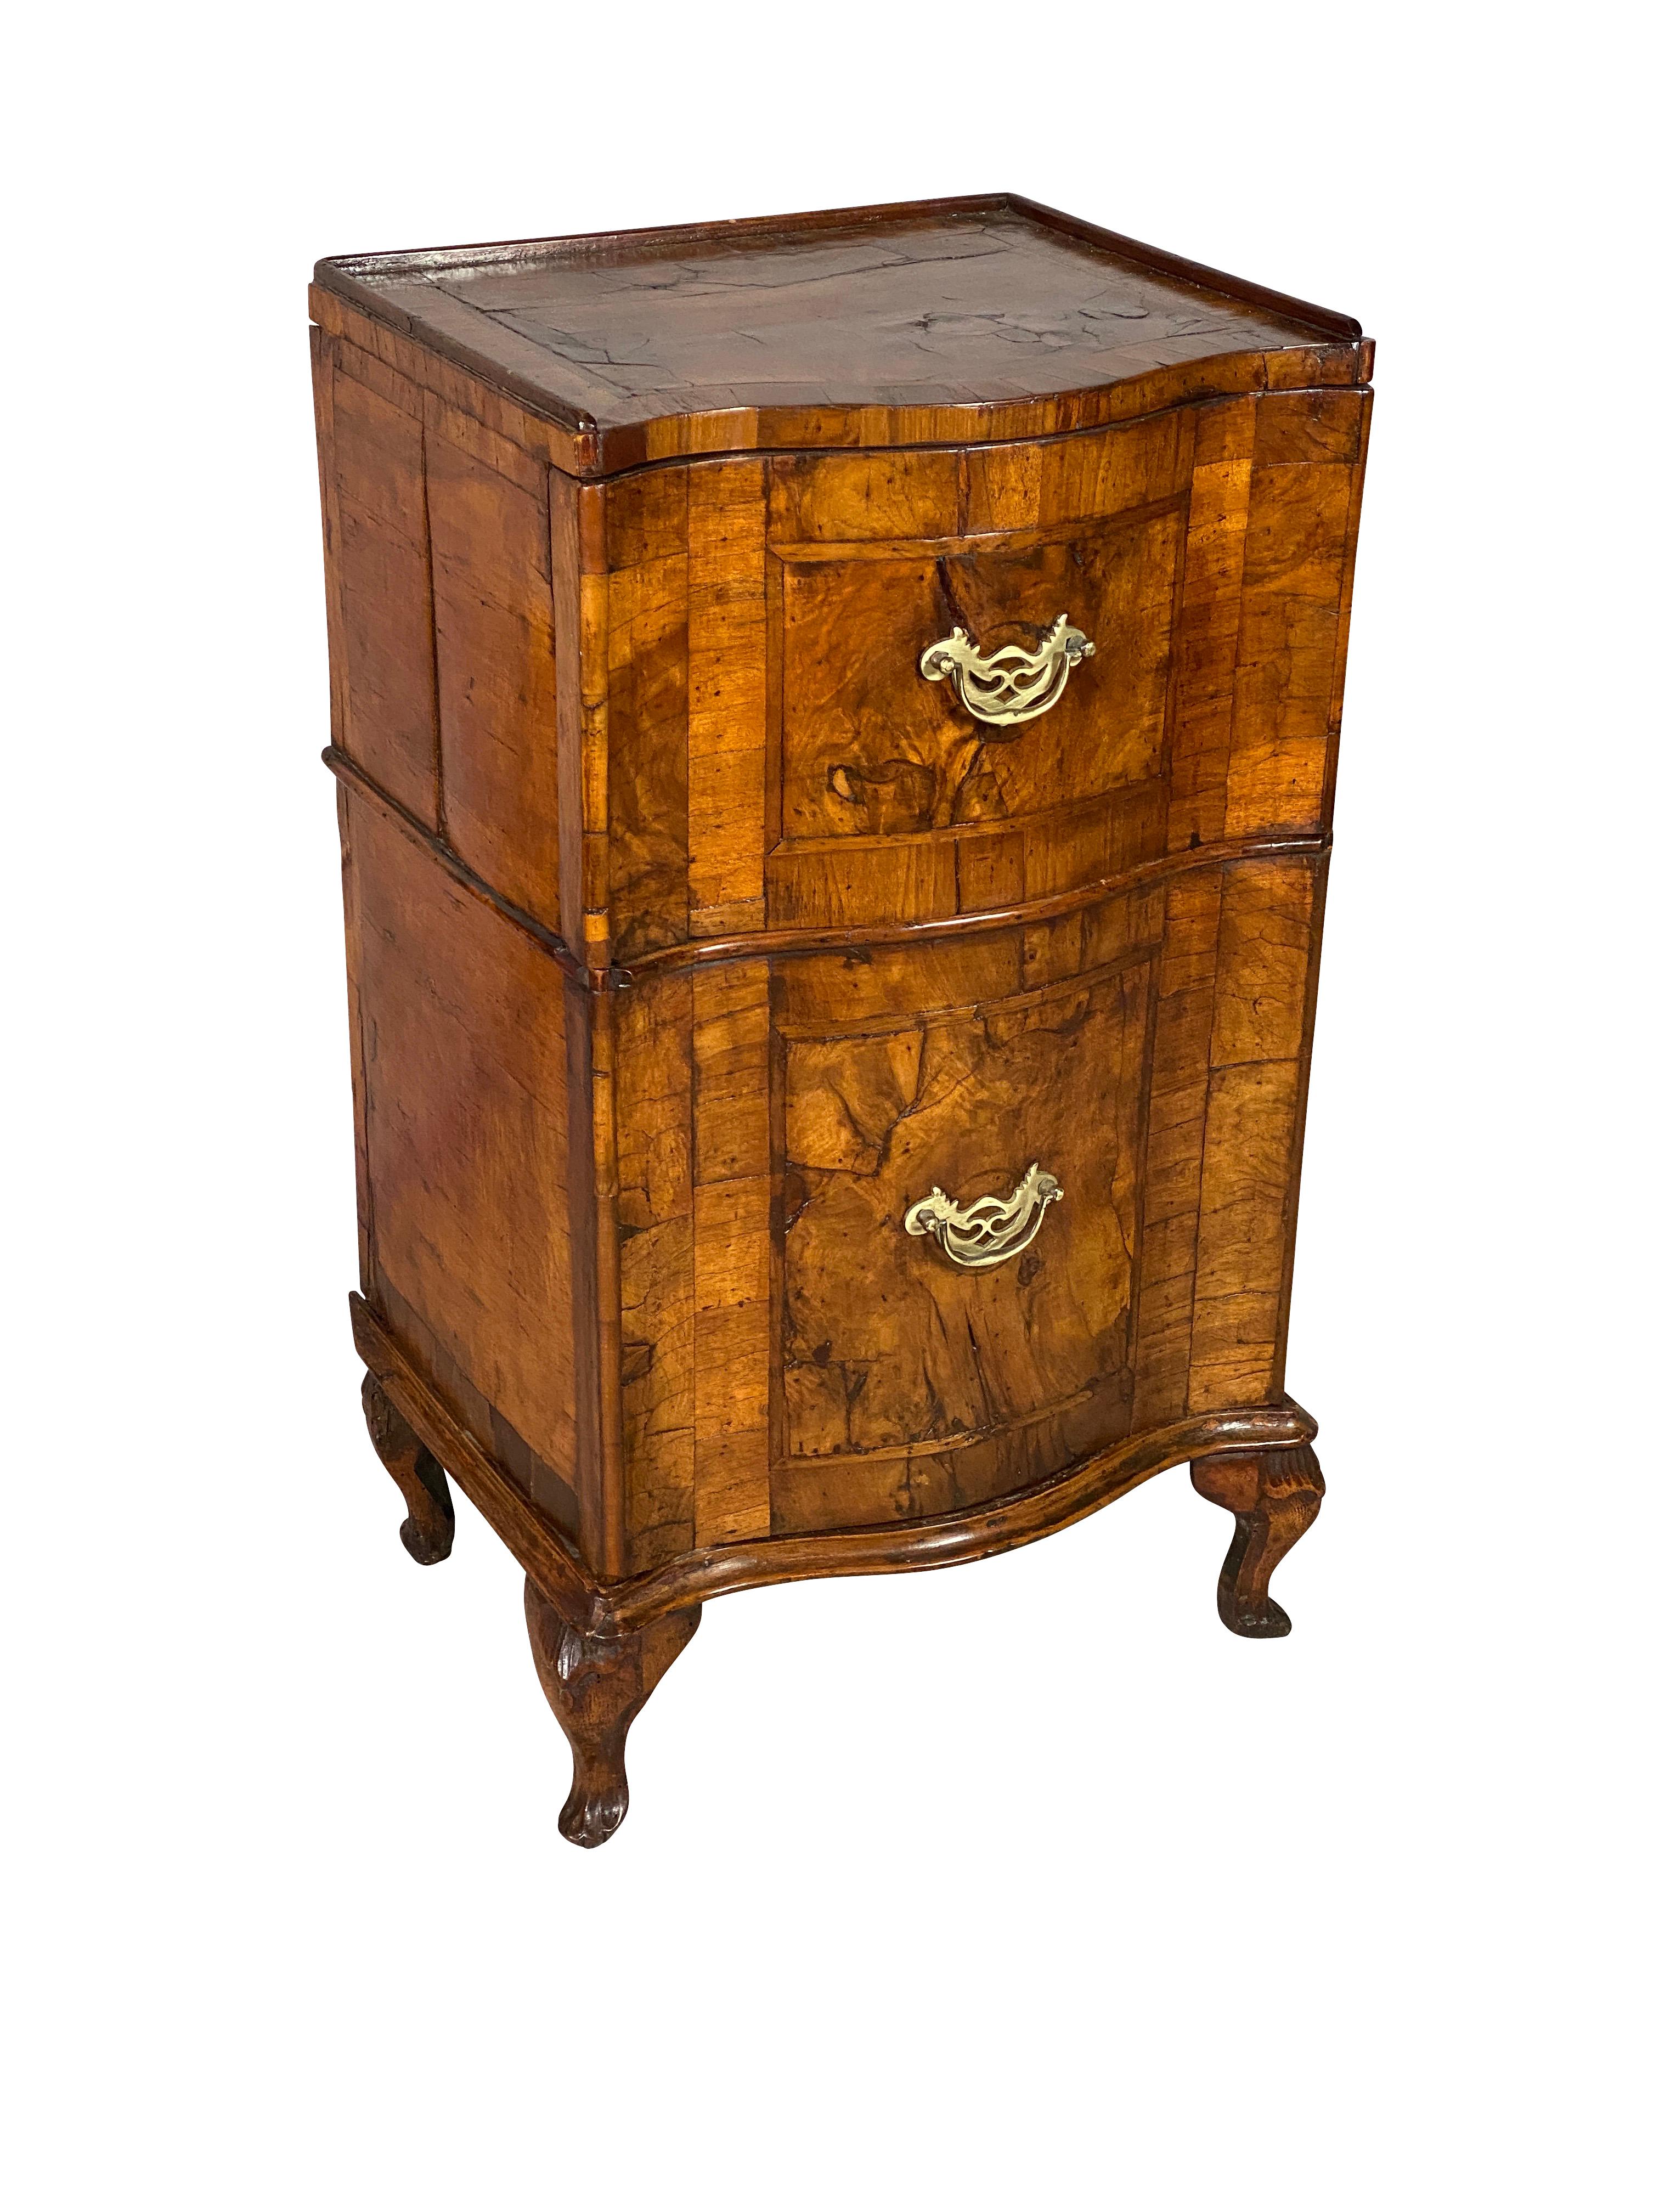 Squarish shaped top over two drawers raised on cabriole legs.